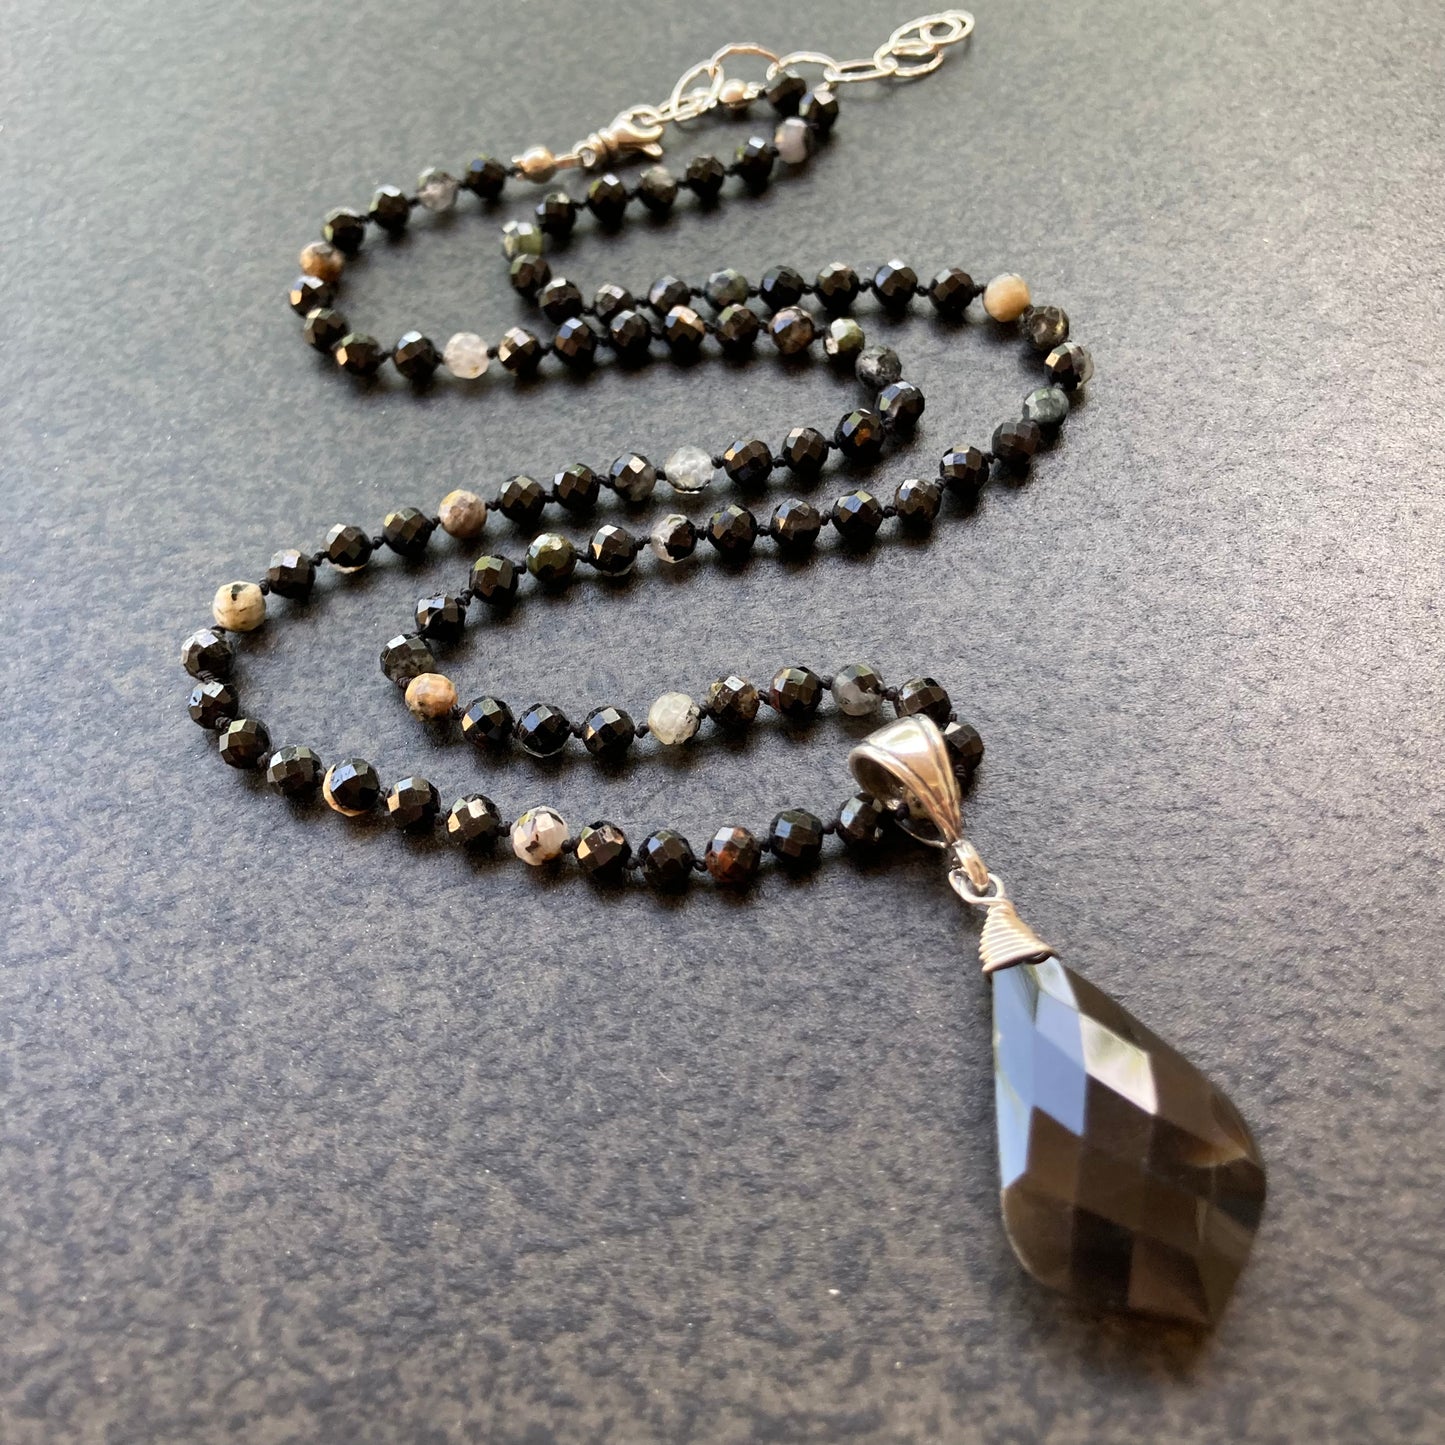 Black Tourmaline Hand Knotted Silk Necklace With Black Onyx Pendant